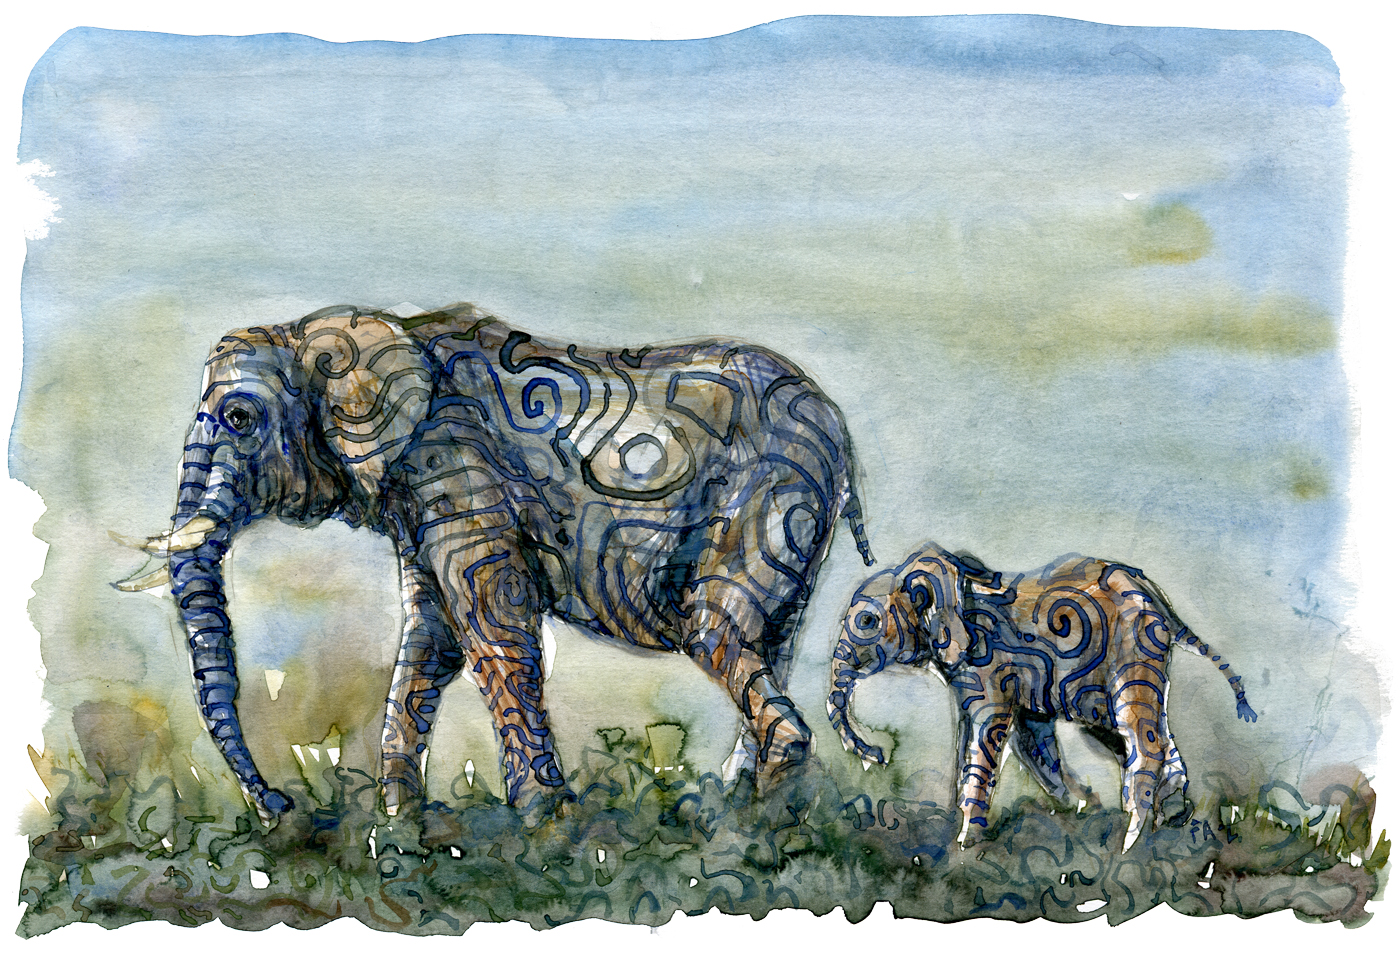 Watercolor of two elephants with stripes, in landscape